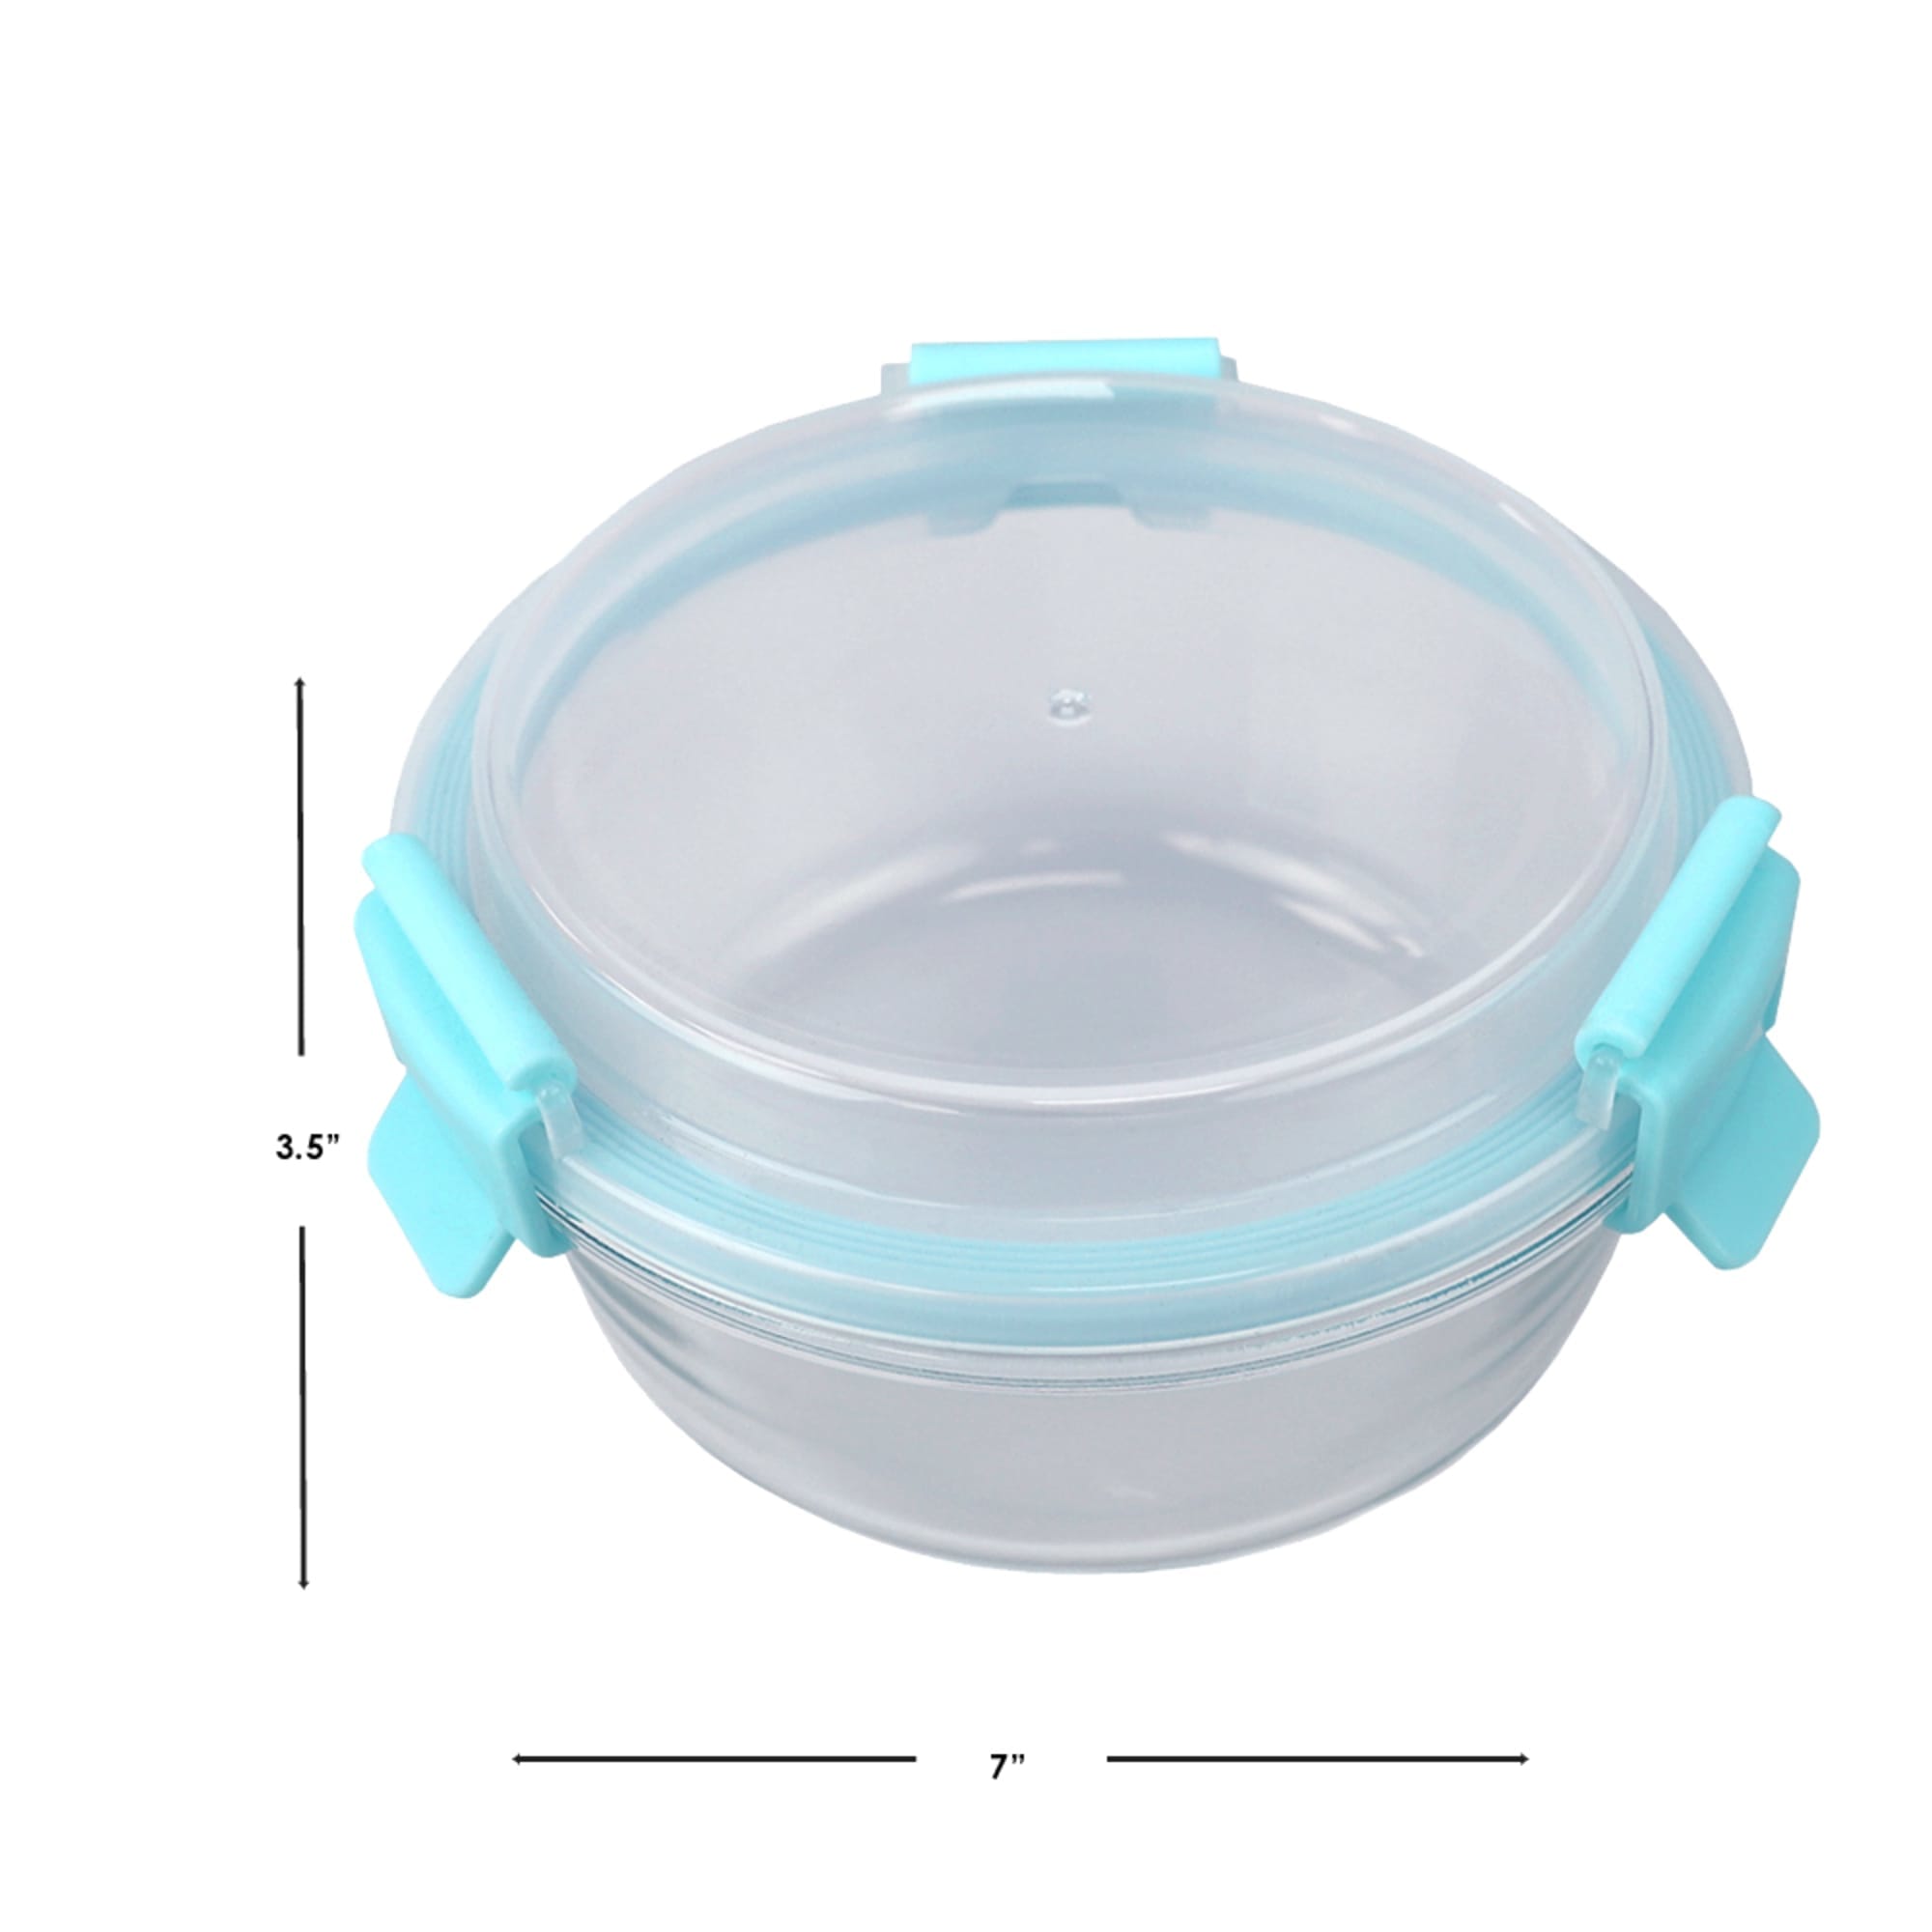 Home Basics  Leak Proof 32 oz. Round Borosilicate Glass Food Storage Container with Air-tight Plastic Lid, Turquoise $5.00 EACH, CASE PACK OF 12